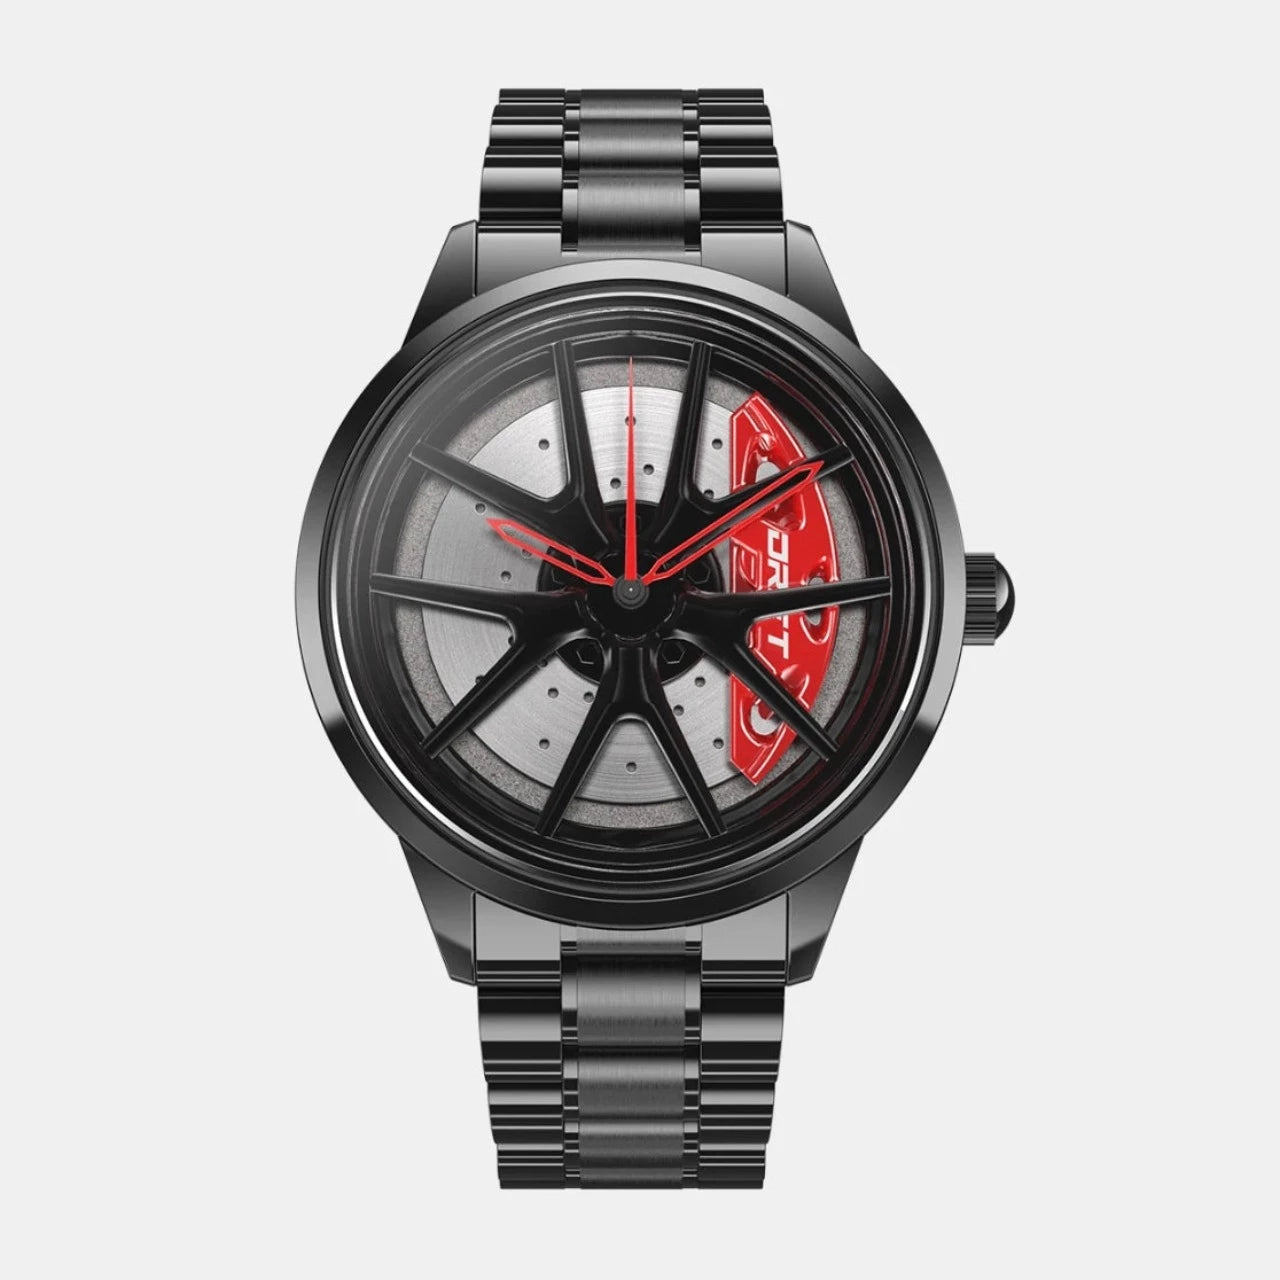 Rev up your style with our dynamic red Nitro Rim Watch! Crafted by a German startup, these precision watches are geared towards motorsport, tuning, and auto aficionados. Get set to ignite your passion! #id_46744364253514